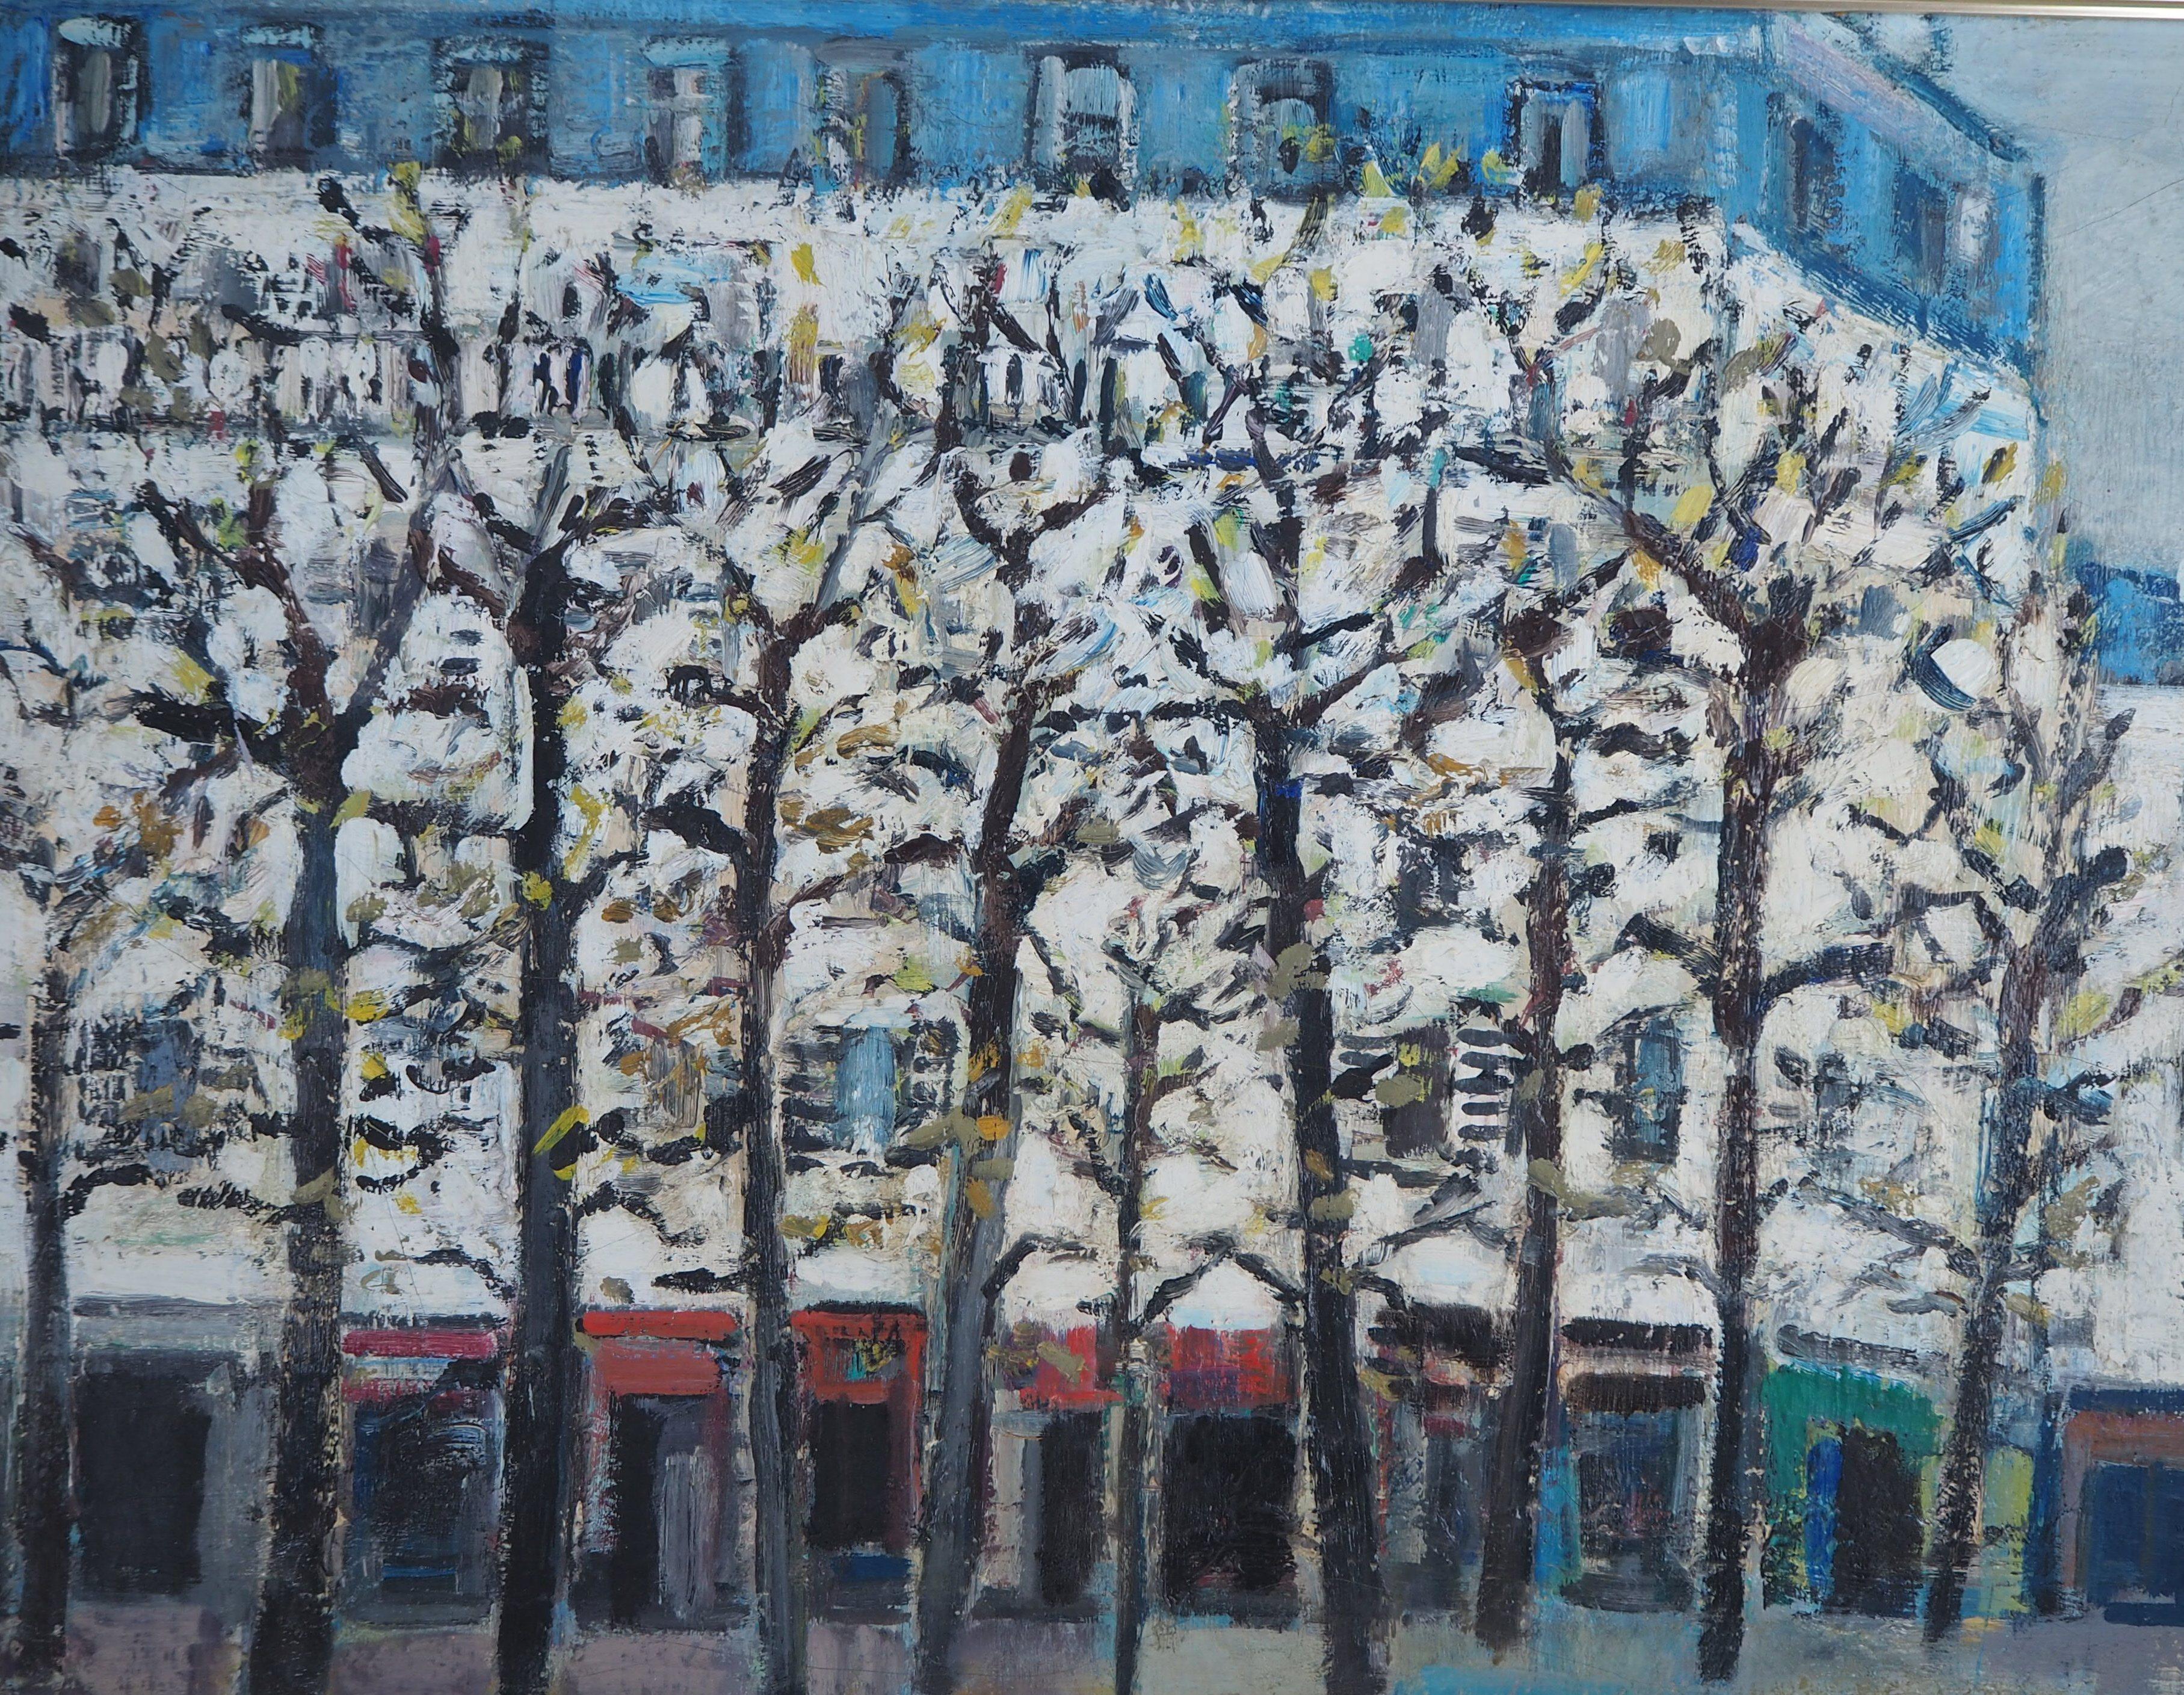 Robert SAVARY
Paris : Square in Montmartre, 1966

Original oil on canvas
Signed bottom right
Signed, titled and dated on the back
On canvas 60 x 73 cm (c. 24 x 29 in)
Presented in a golden wood frame 76 x 89 cm (c. 30 x 38 in)

Excellent condition,